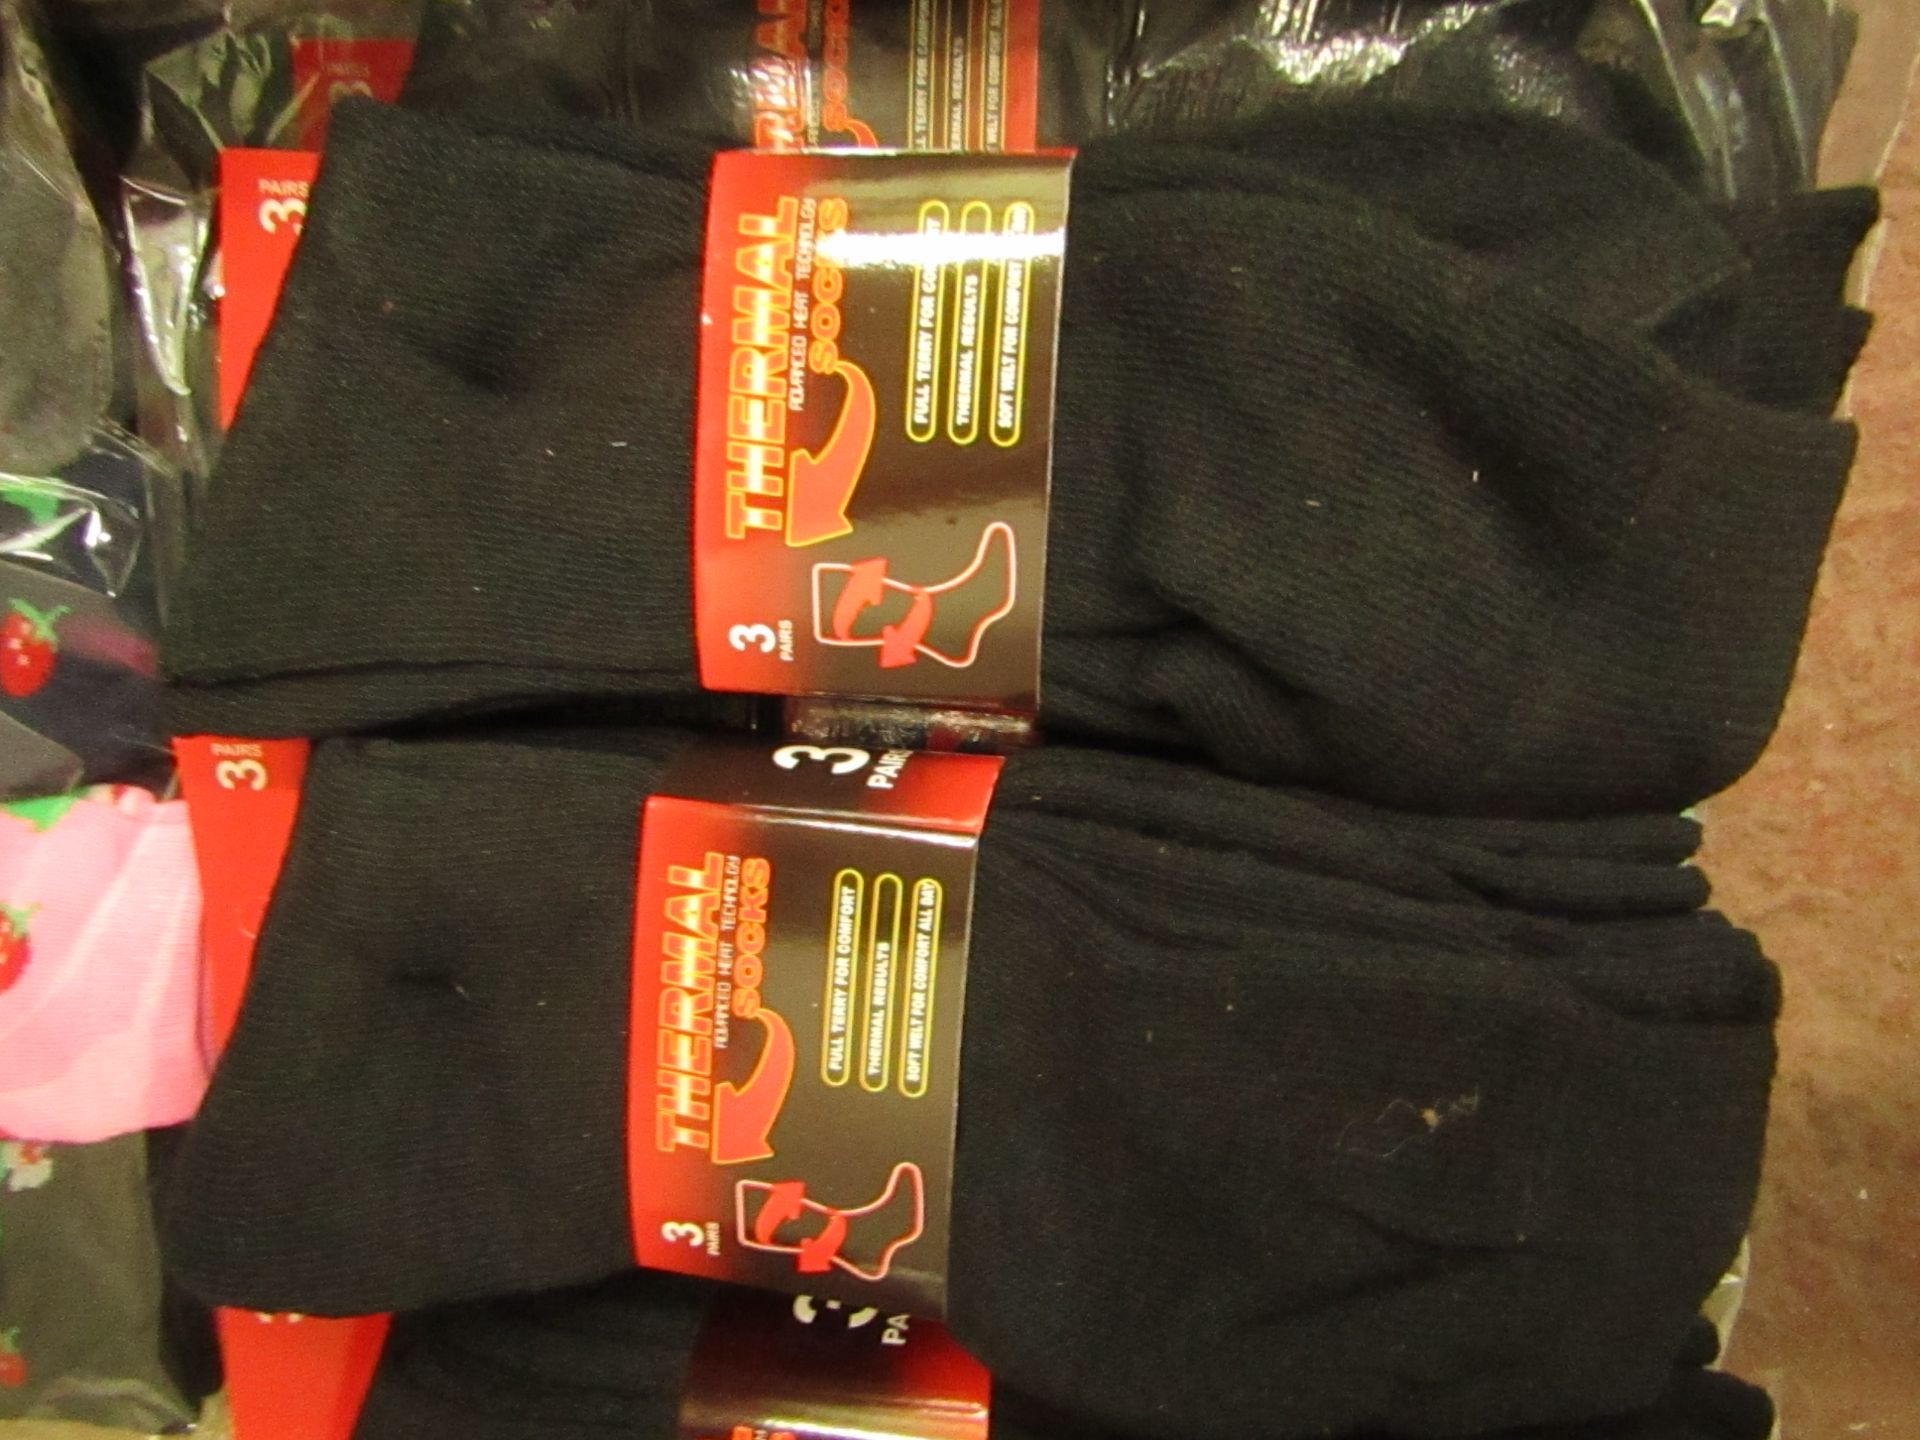 6 X Pairs of Mens Thermal Socks (Full Terry for comfort) size 6-11 new in packaging